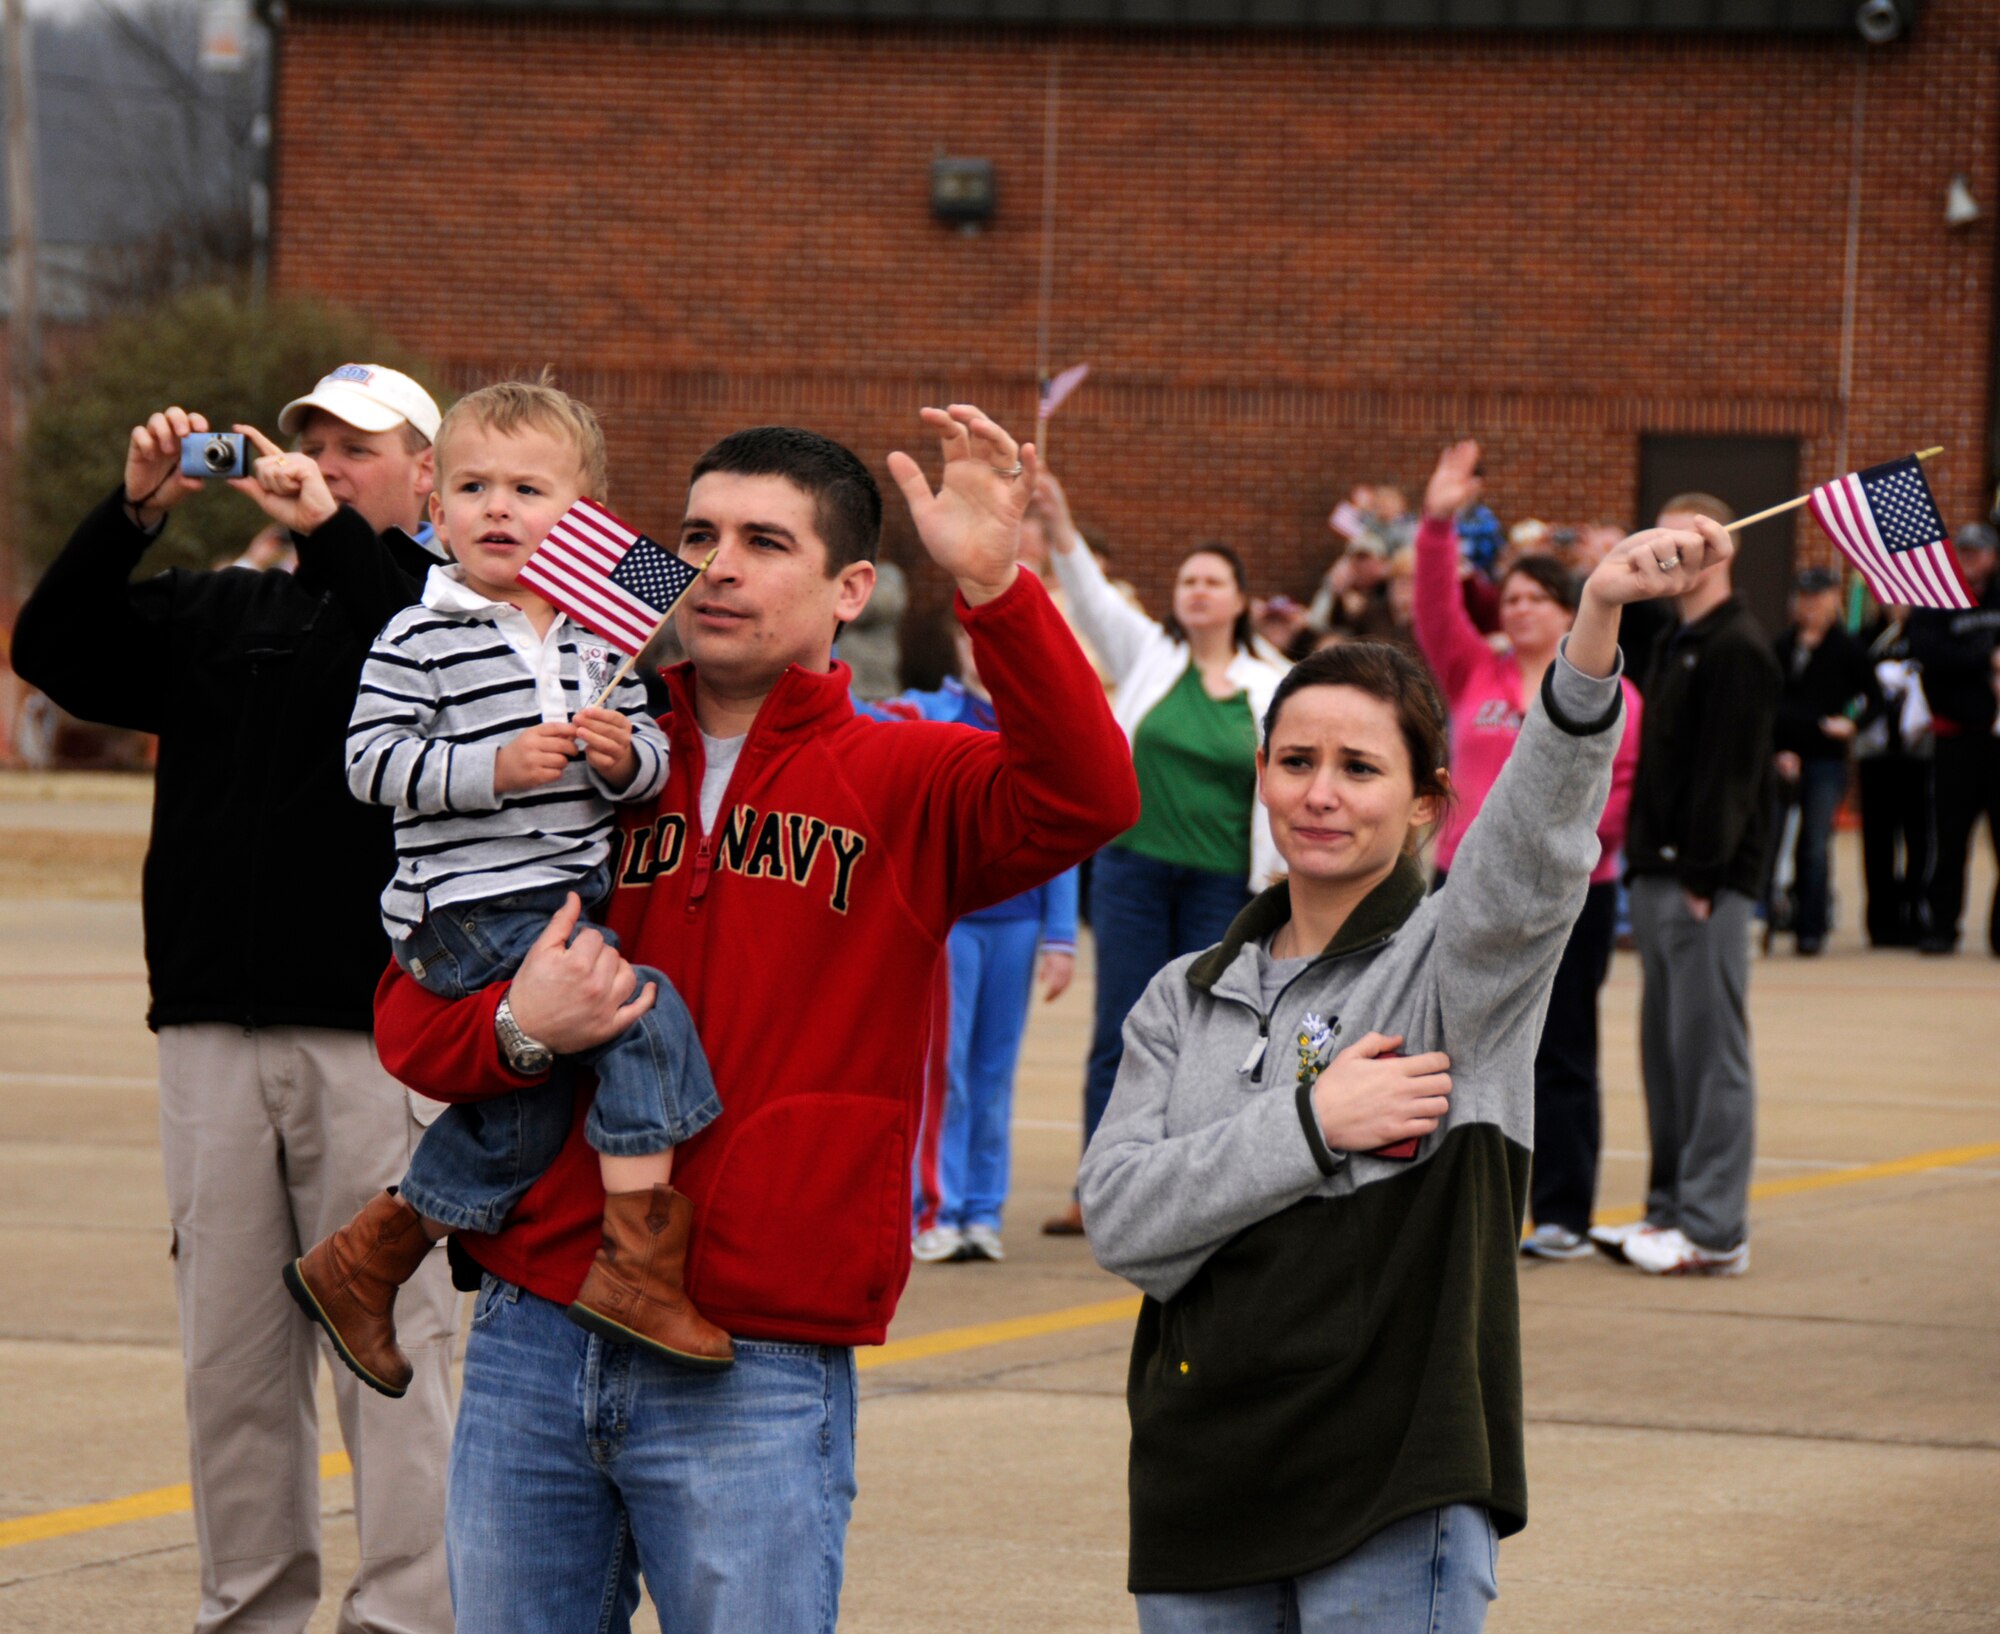 Family and friends of members of the 188th Fighter Wing wave goodbye as a McDonnell Douglas DC-10 with more than 200 Airmen on board takes off at the Fort Smith (Ark.) Regional Airport March 8, 2010. The 188th will be deployed for more than two months to Kandahar, Afghanistan, as part of the unit's Aerospace Expeditionary Forces rotation. This will mark the 188th's first combat deployment in the A-10 Thunderbolt II "Warthog." (U.S. Air Force photo by Technical Sgt Stephen M. Hornsey/188th Fighter Wing Public Affairs) 